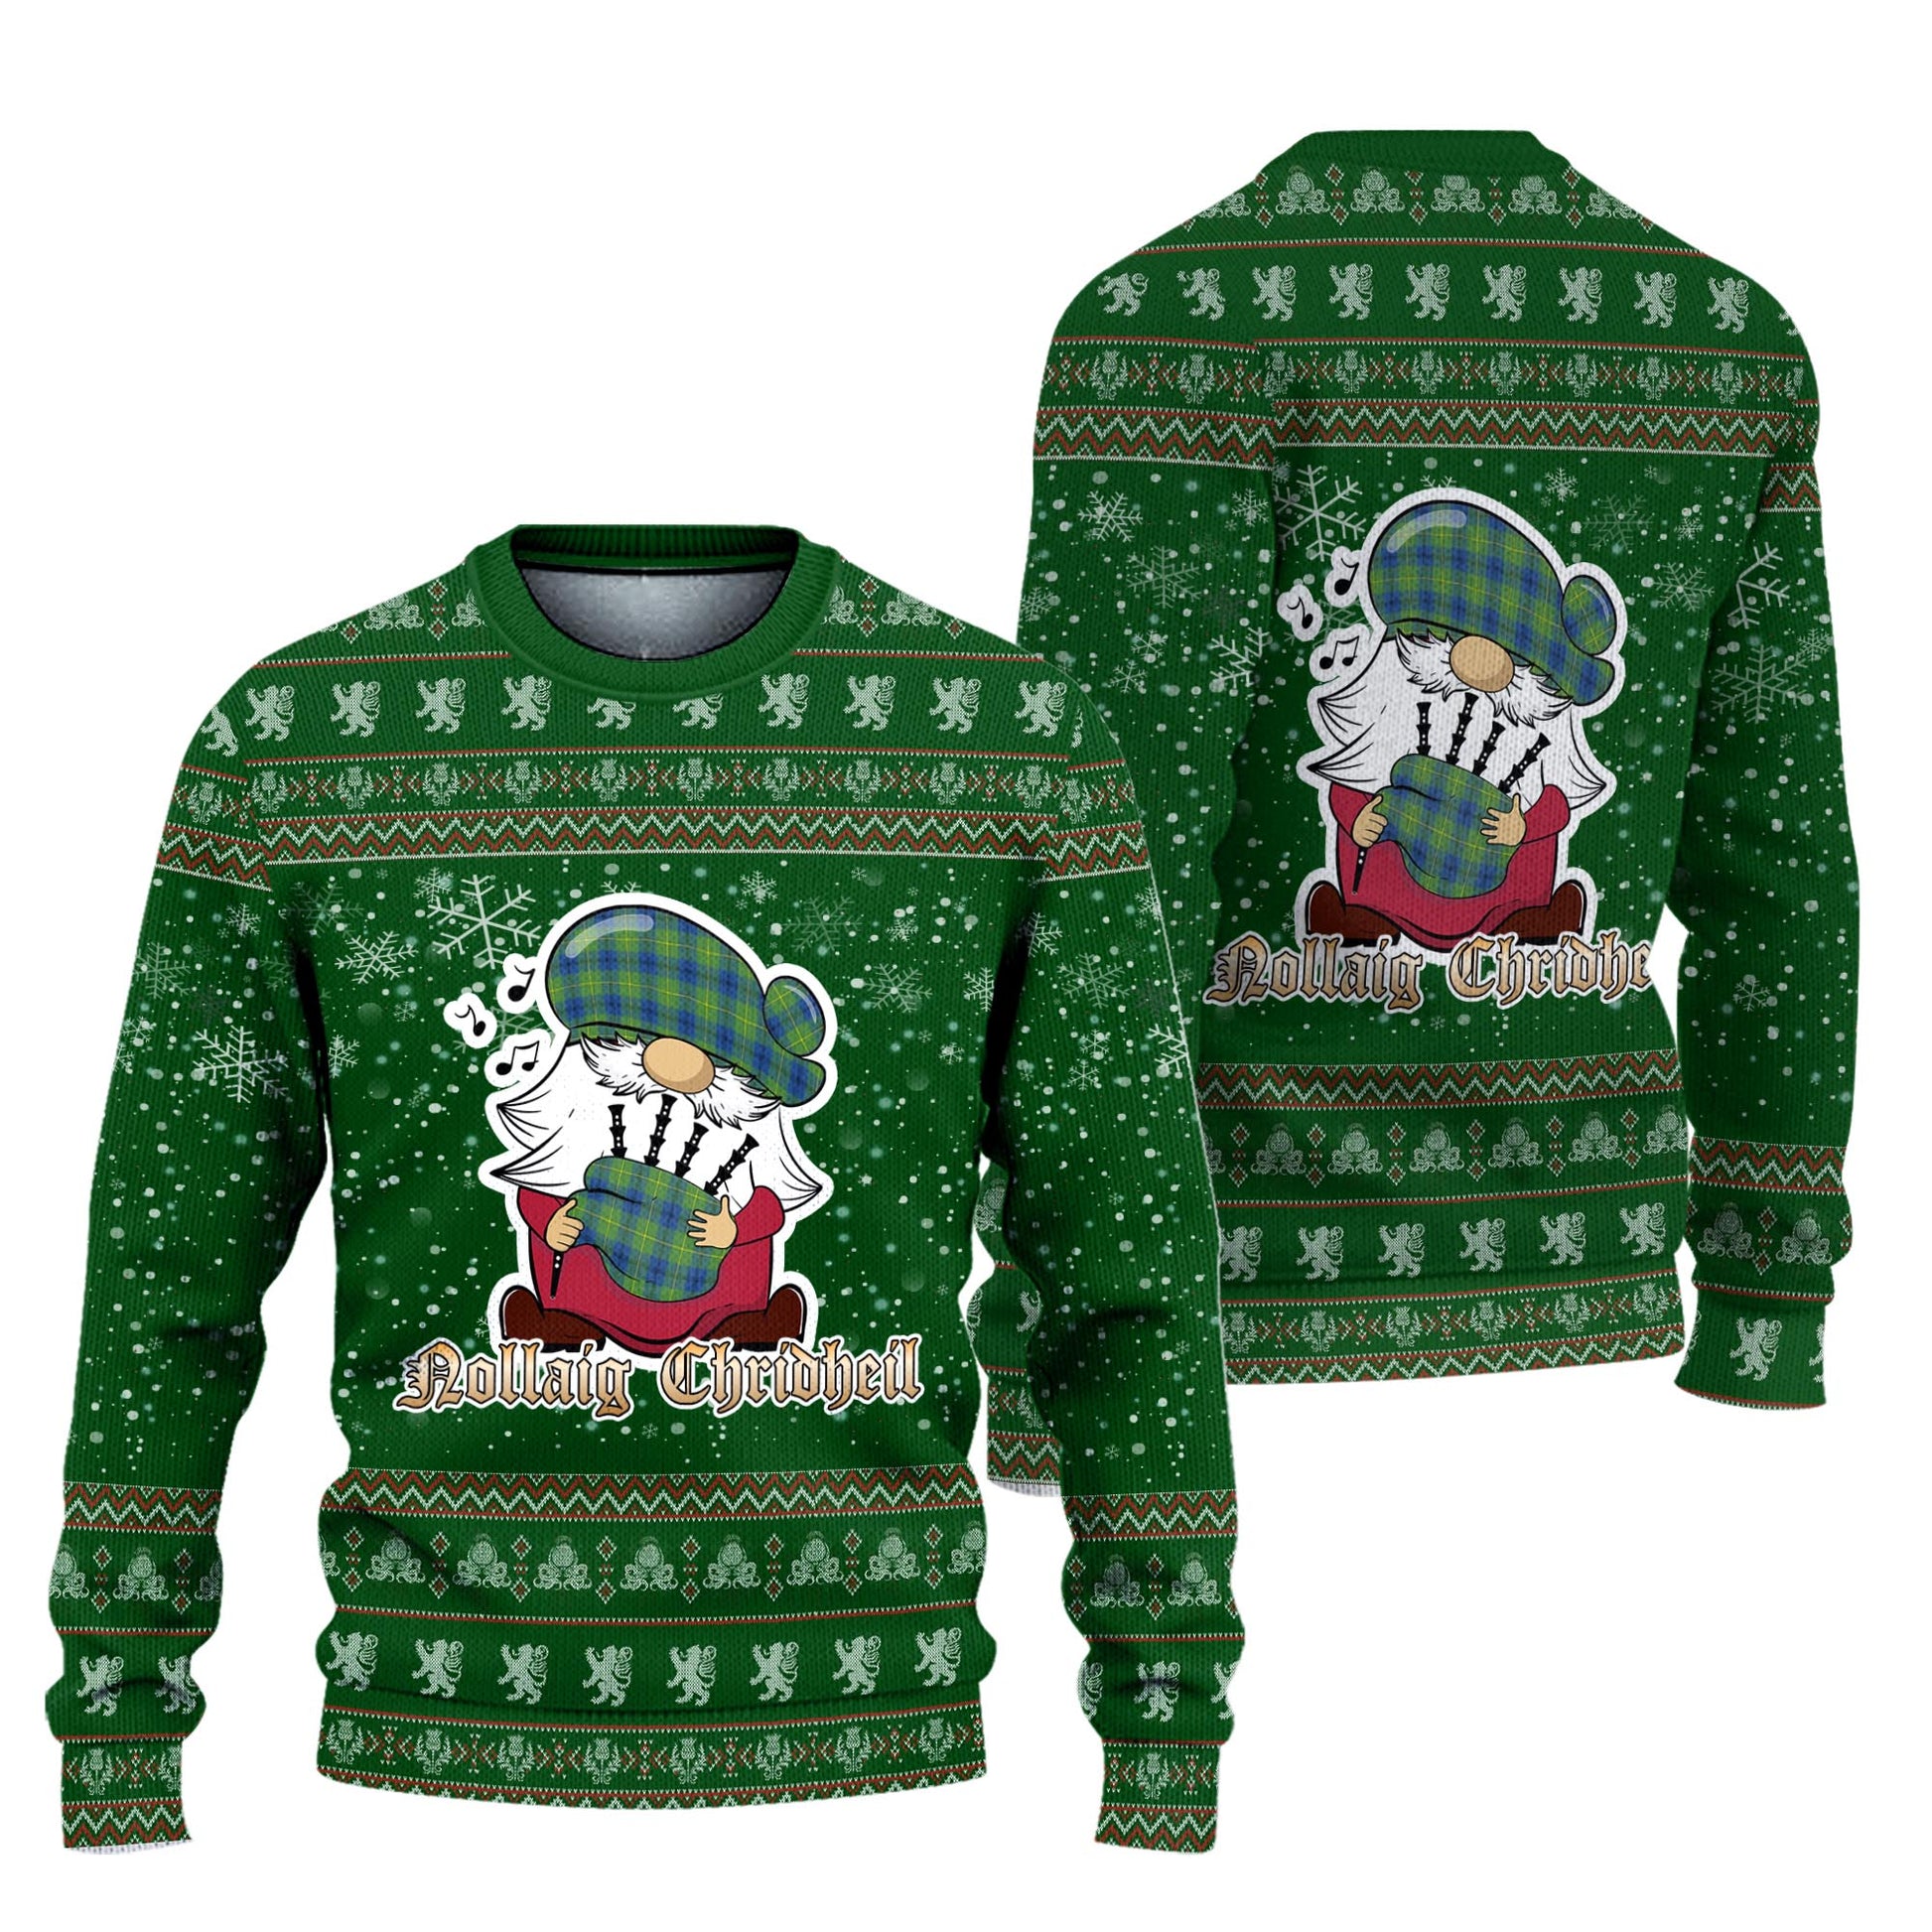 Johnstone-Johnston Ancient Clan Christmas Family Knitted Sweater with Funny Gnome Playing Bagpipes Unisex Green - Tartanvibesclothing